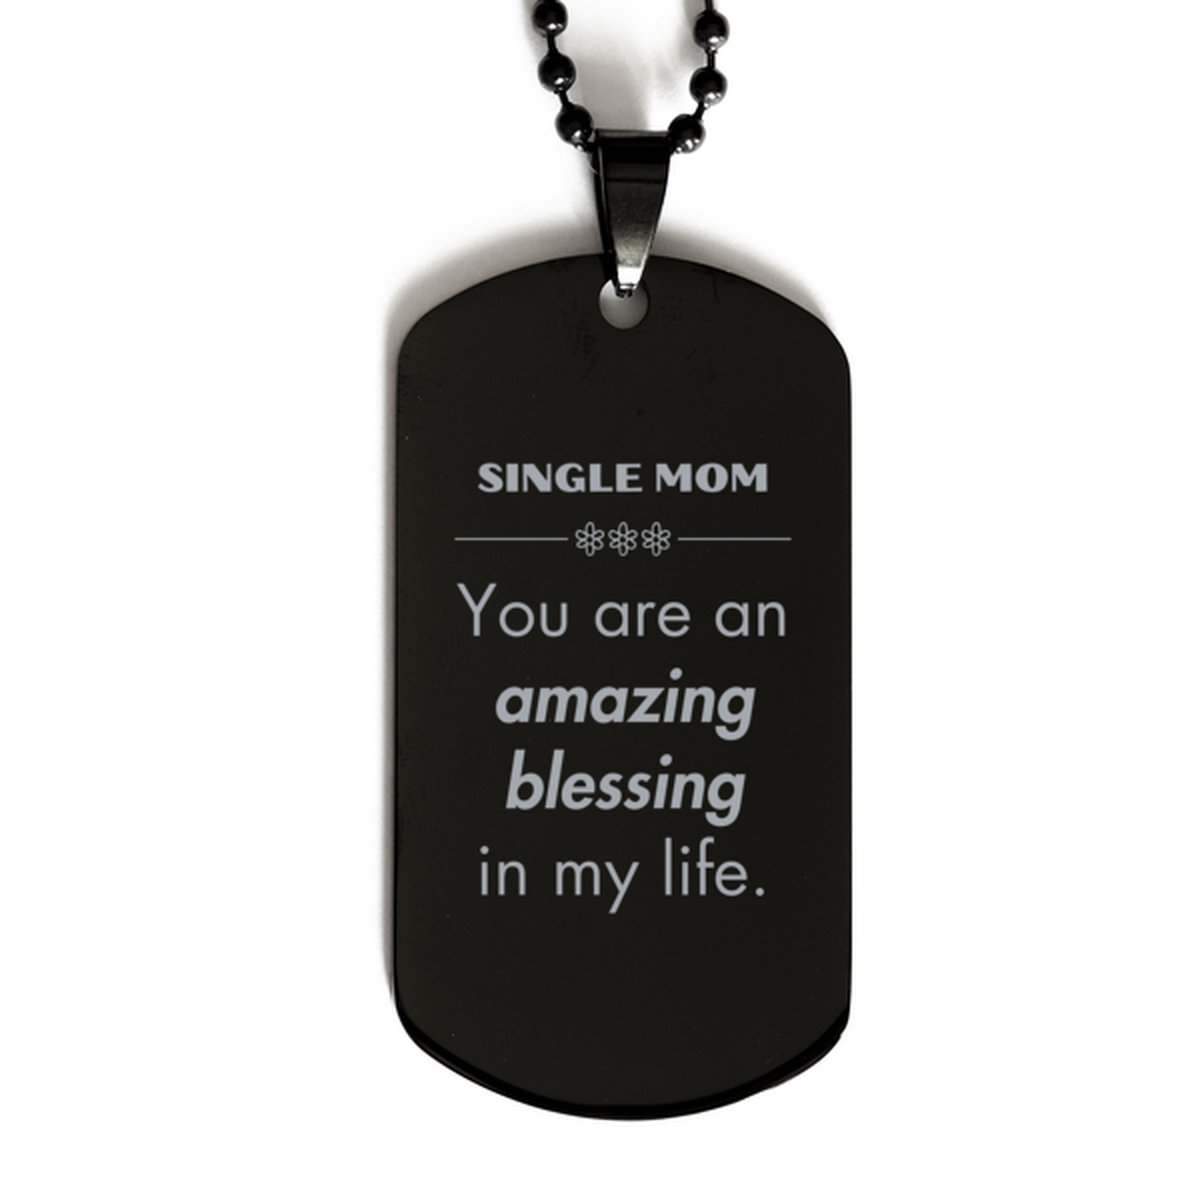 Single Mom Black Dog Tag, You are an amazing blessing in my life, Thank You Gifts For Single Mom, Inspirational Birthday Christmas Unique Gifts For Single Mom